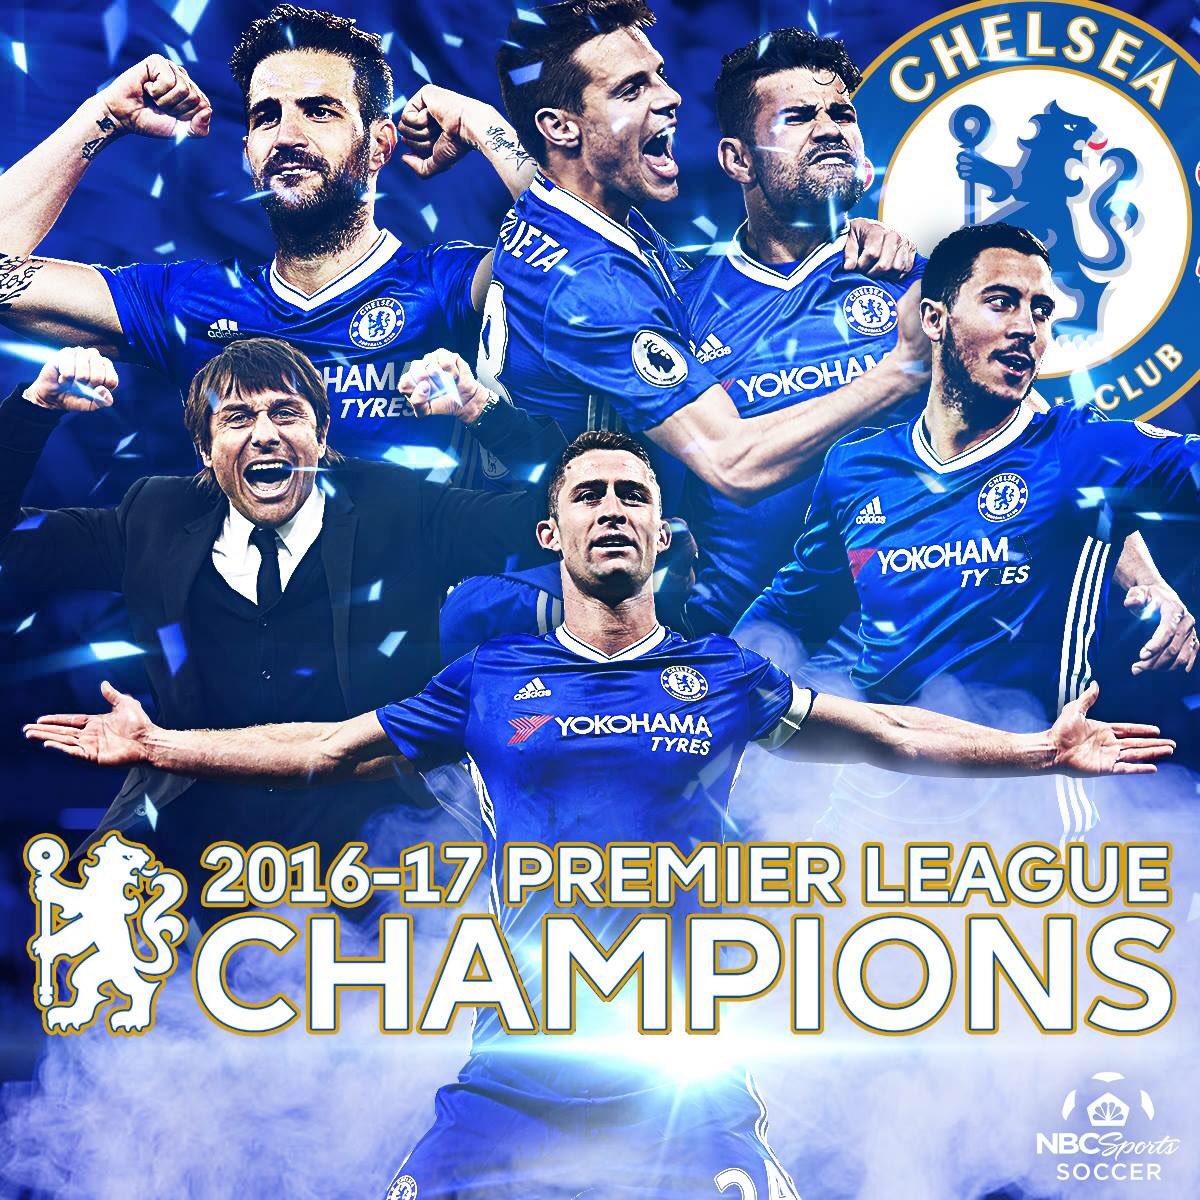 Read more about the article Chelsea crowned Premier League champions, Blues secure title after beating West Brom